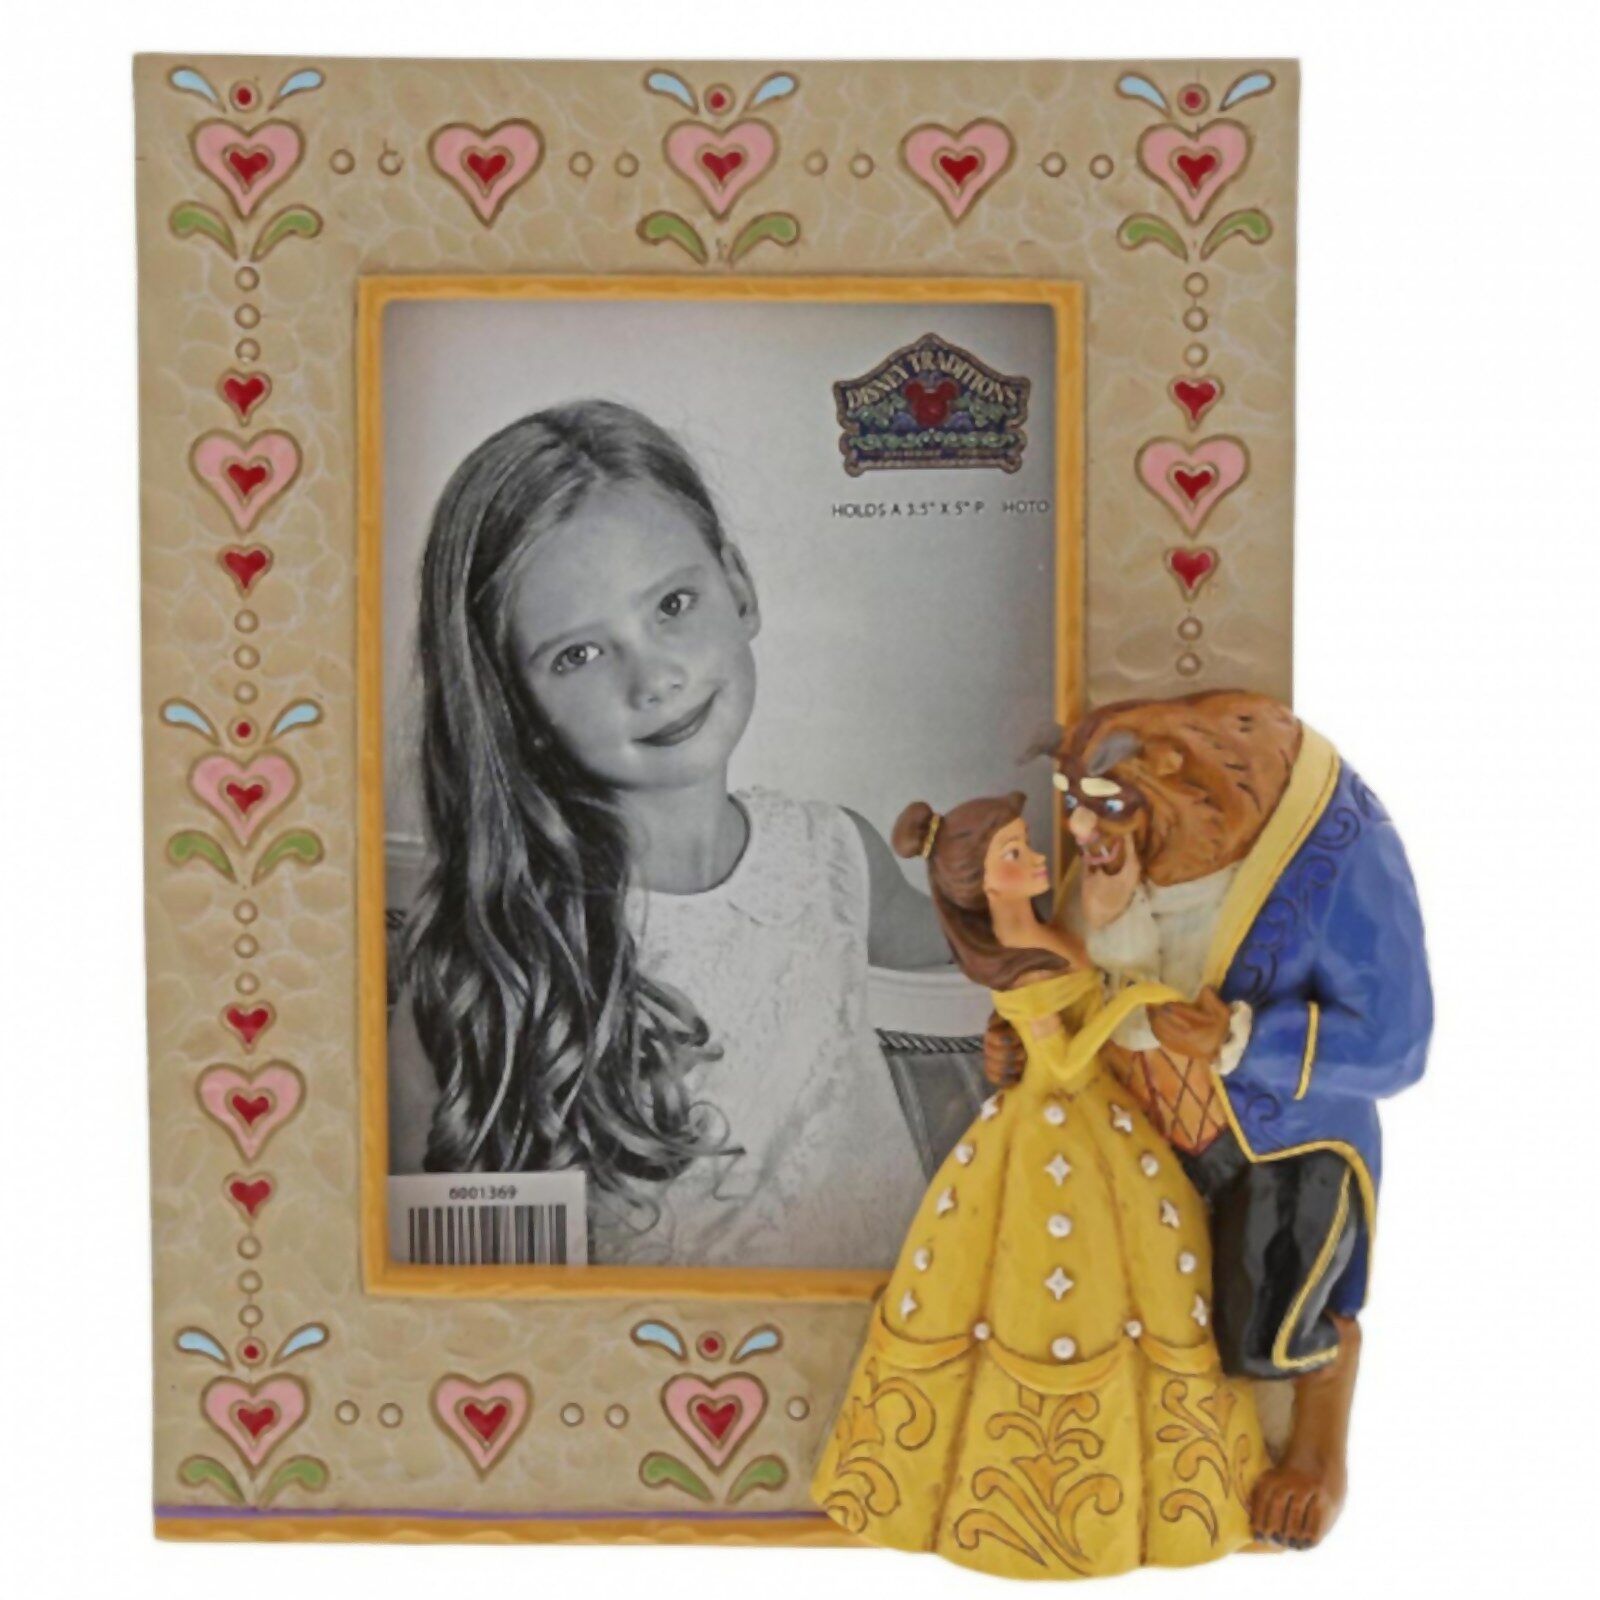 Enesco Disney Traditions Beauty and the Beast Frame 18.0cm